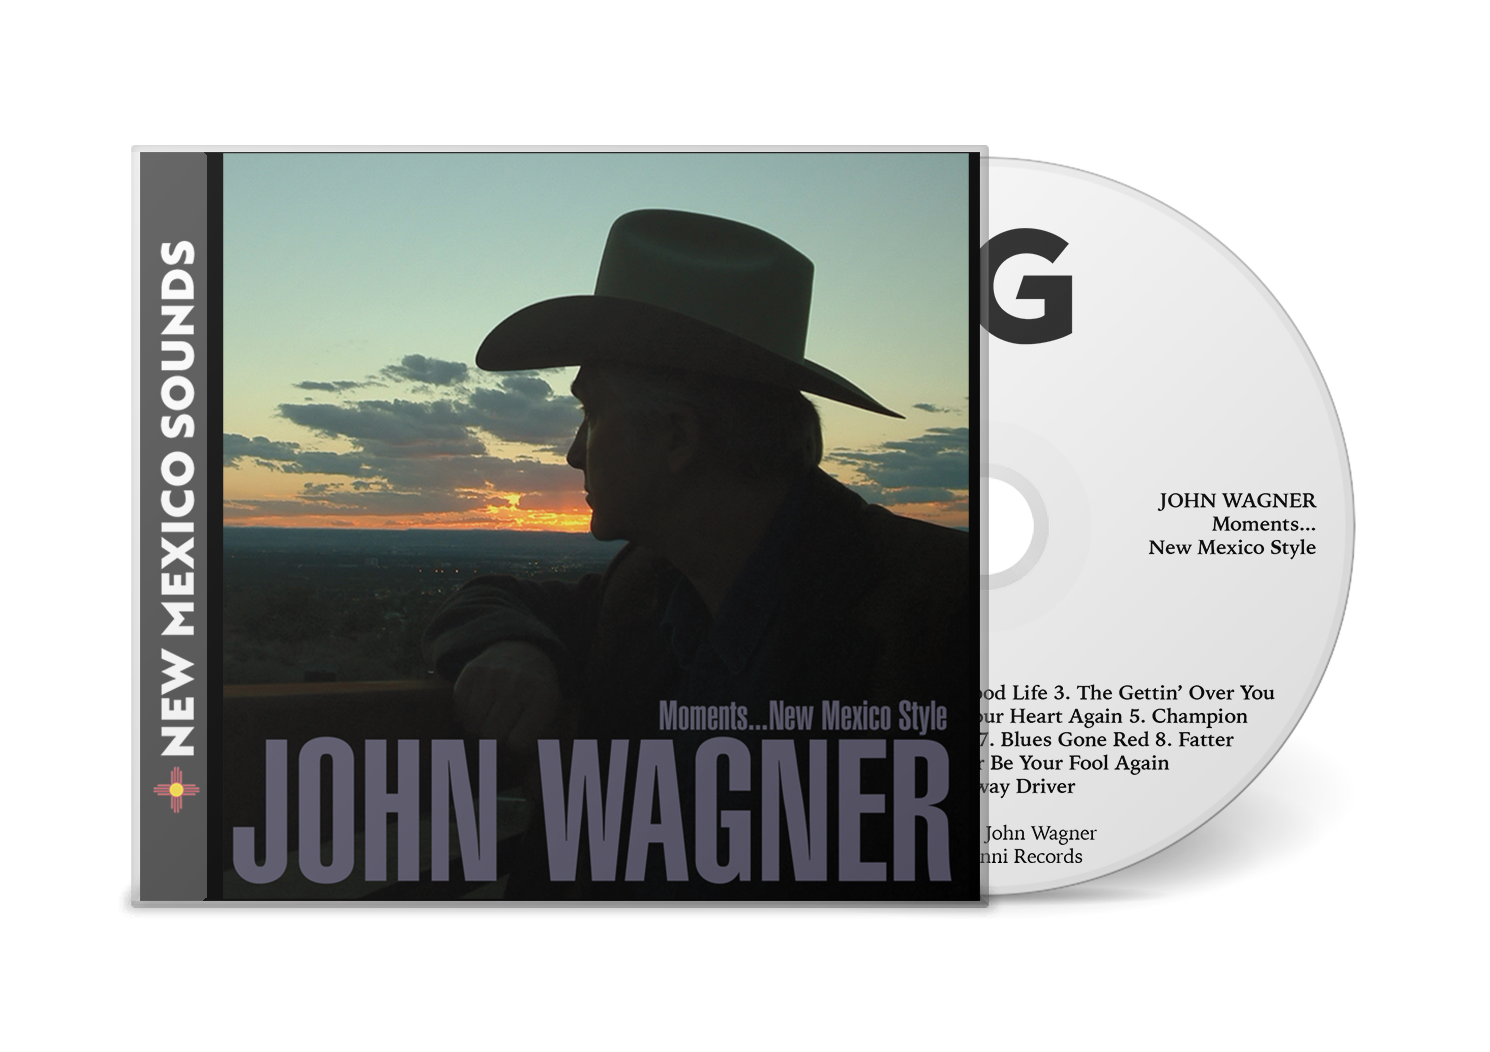 John Wagner "Moments...New Mexico Style" CD